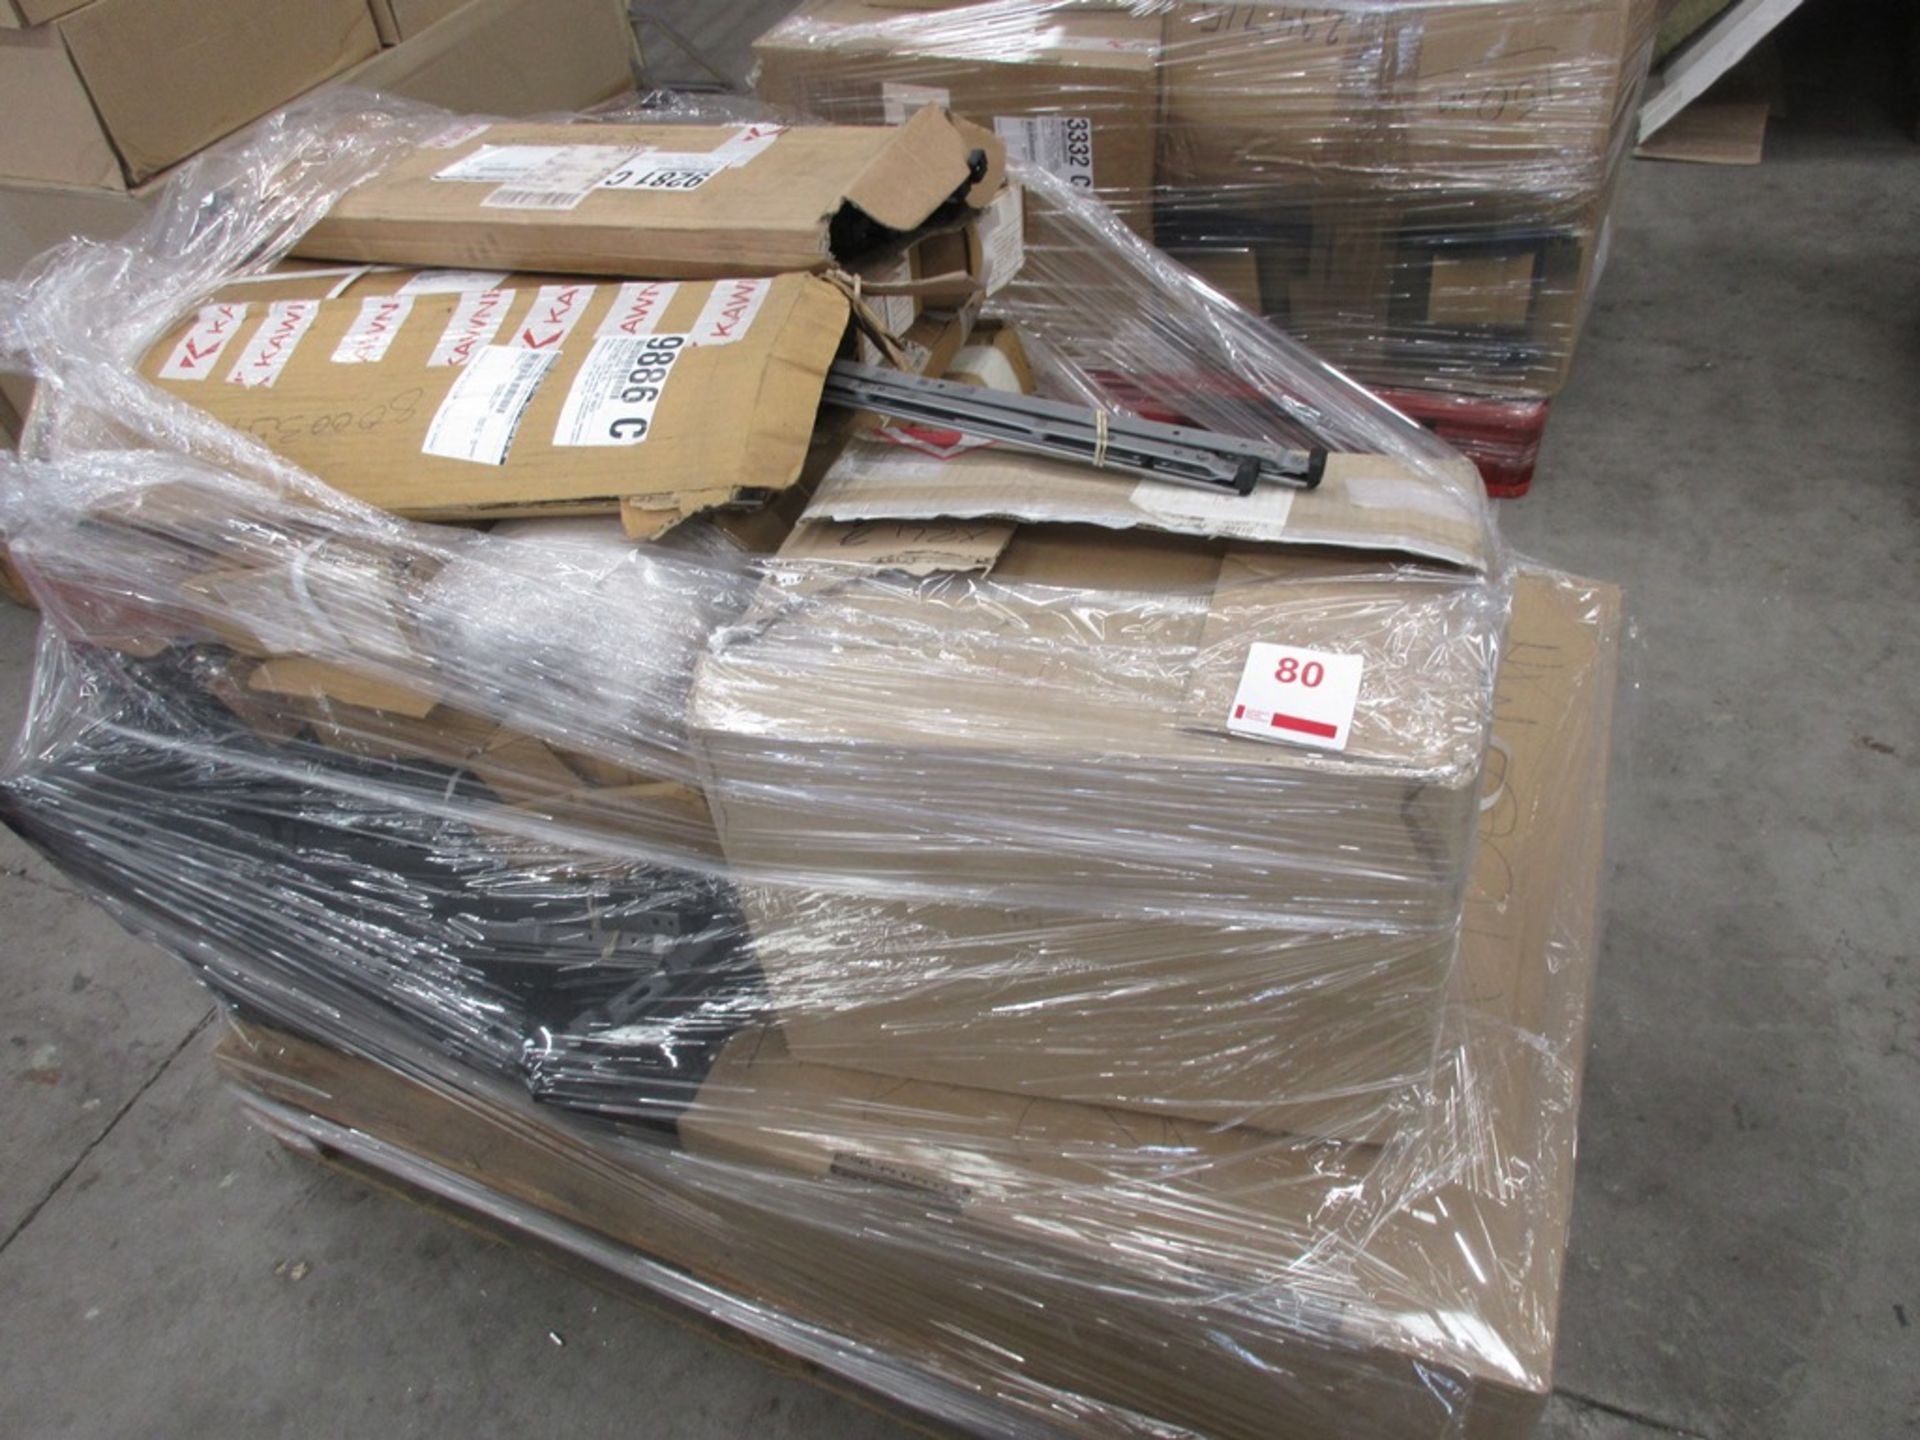 Two pallets of associated window fittings